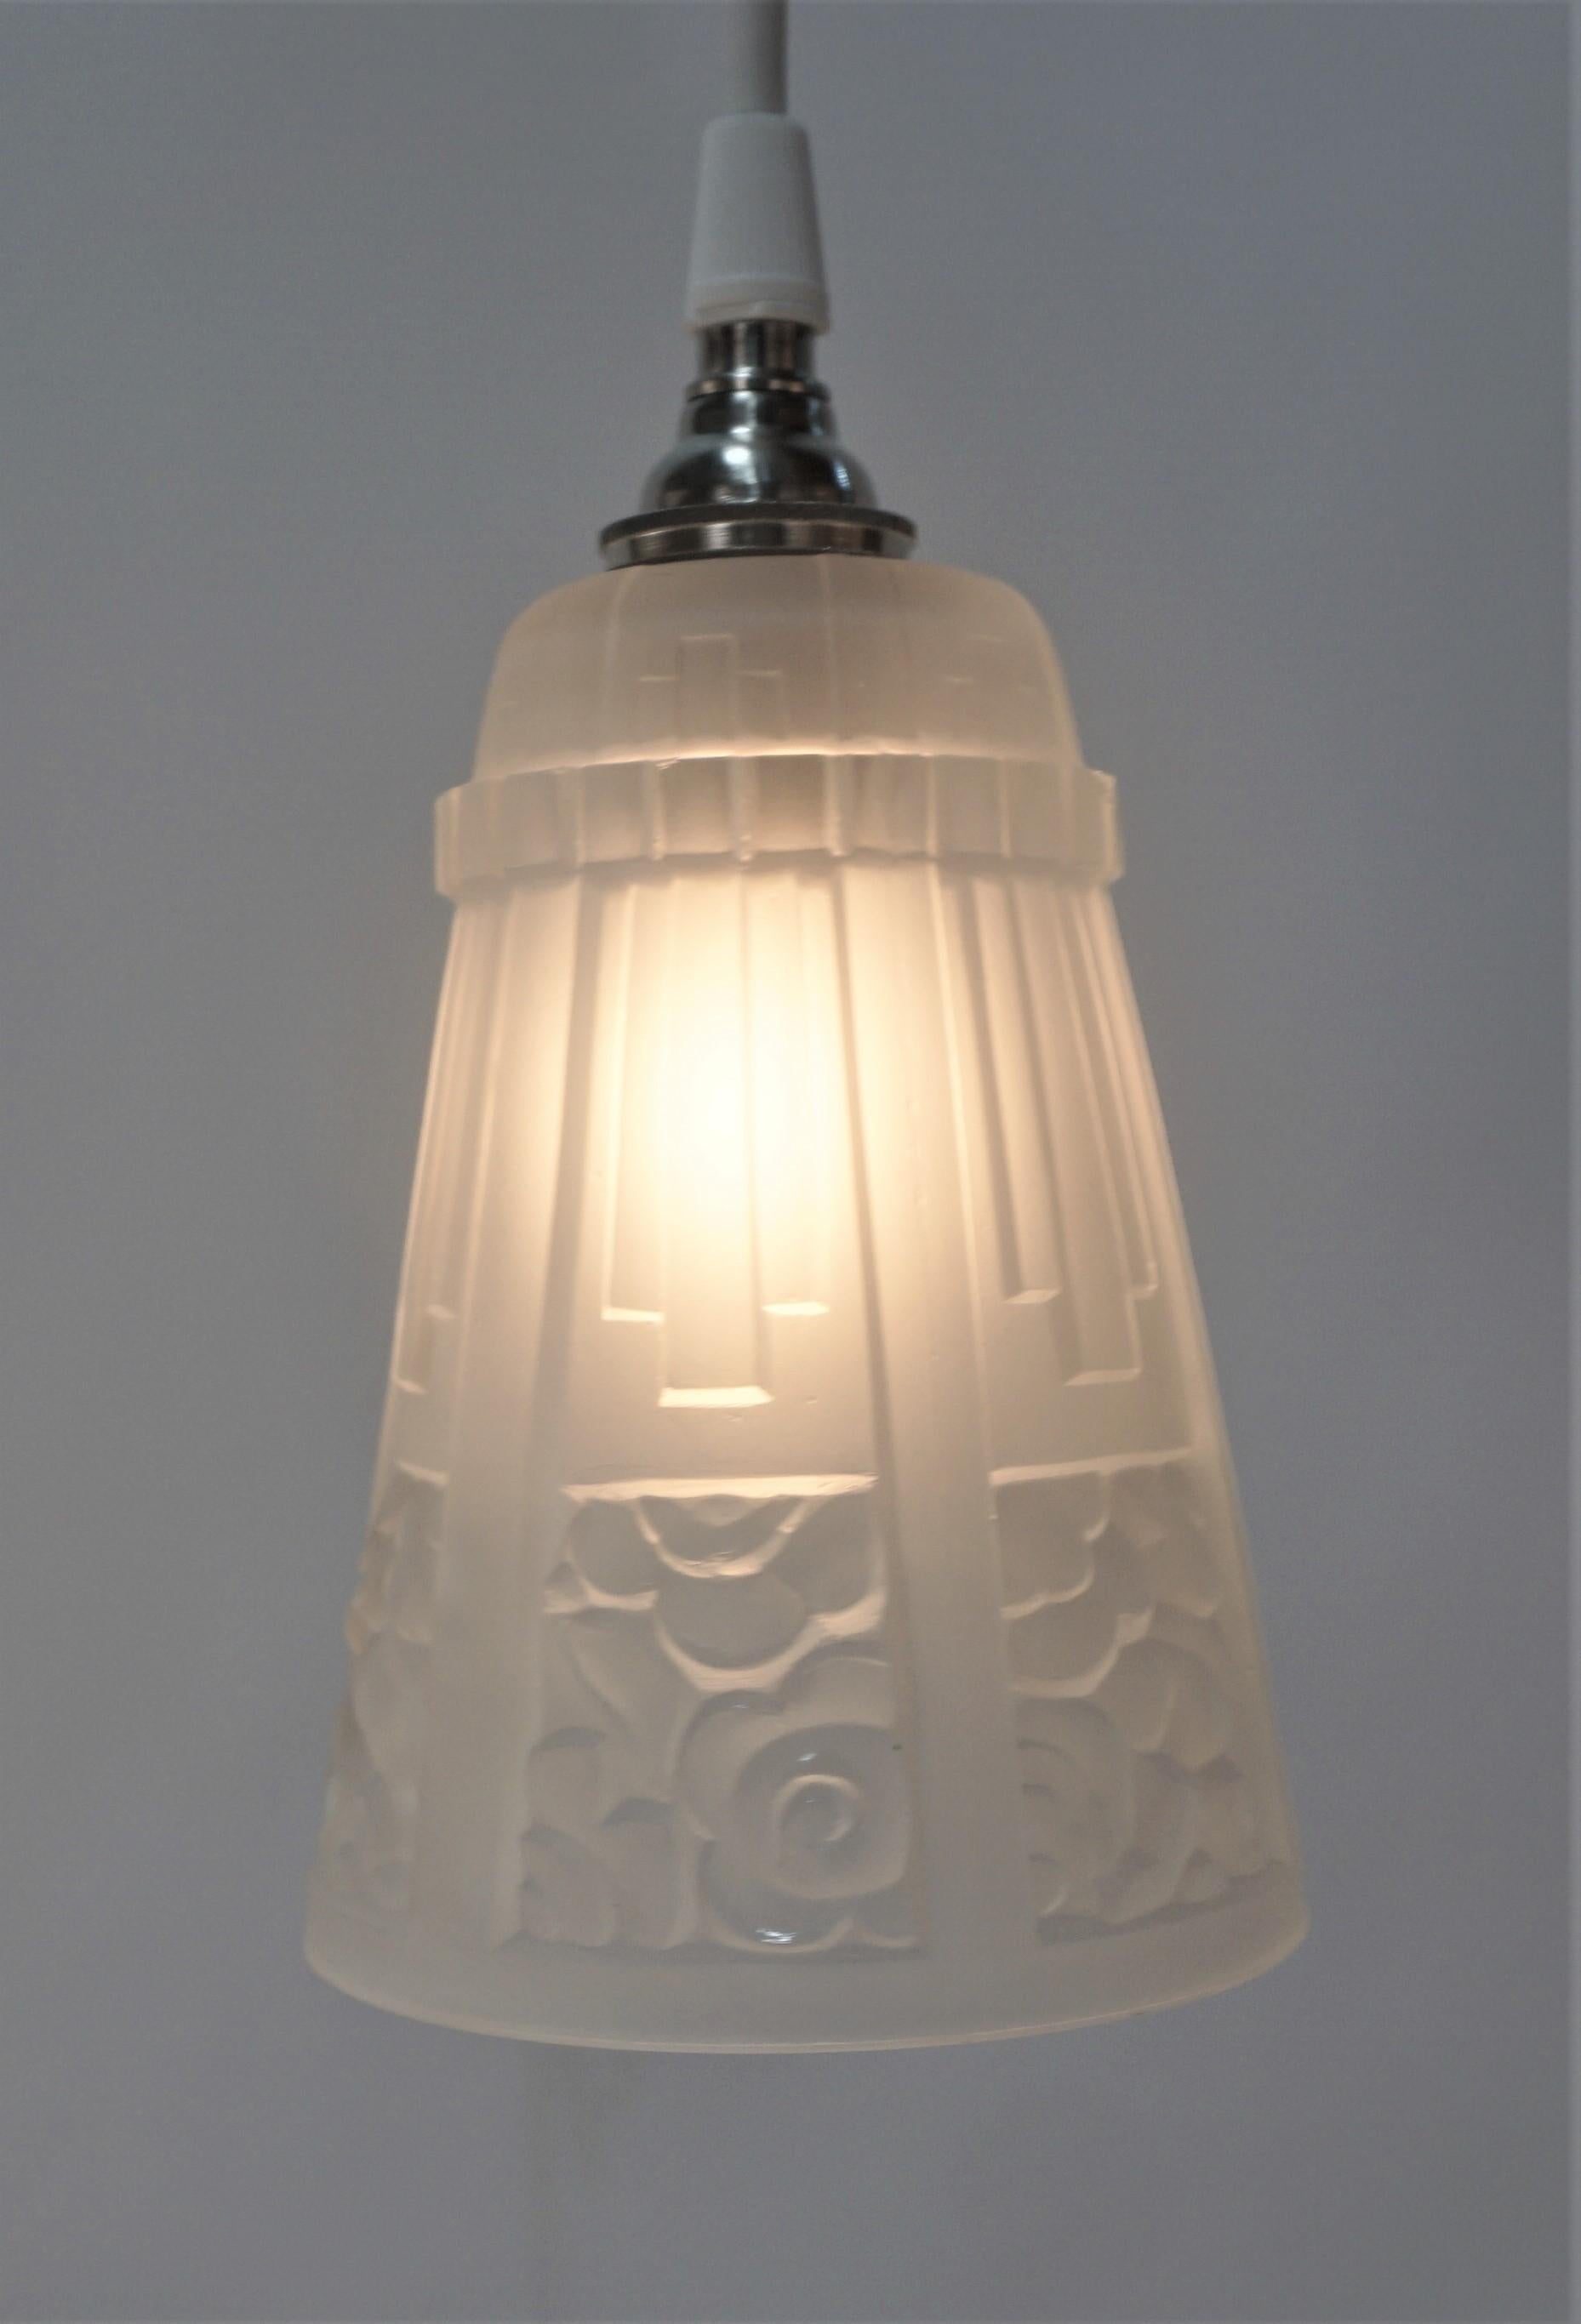 Set of thee French 1920's Art Deco glass shades have been modified with new brushed nickel canopy as pendant lights.
Measures: Glass is 4.25